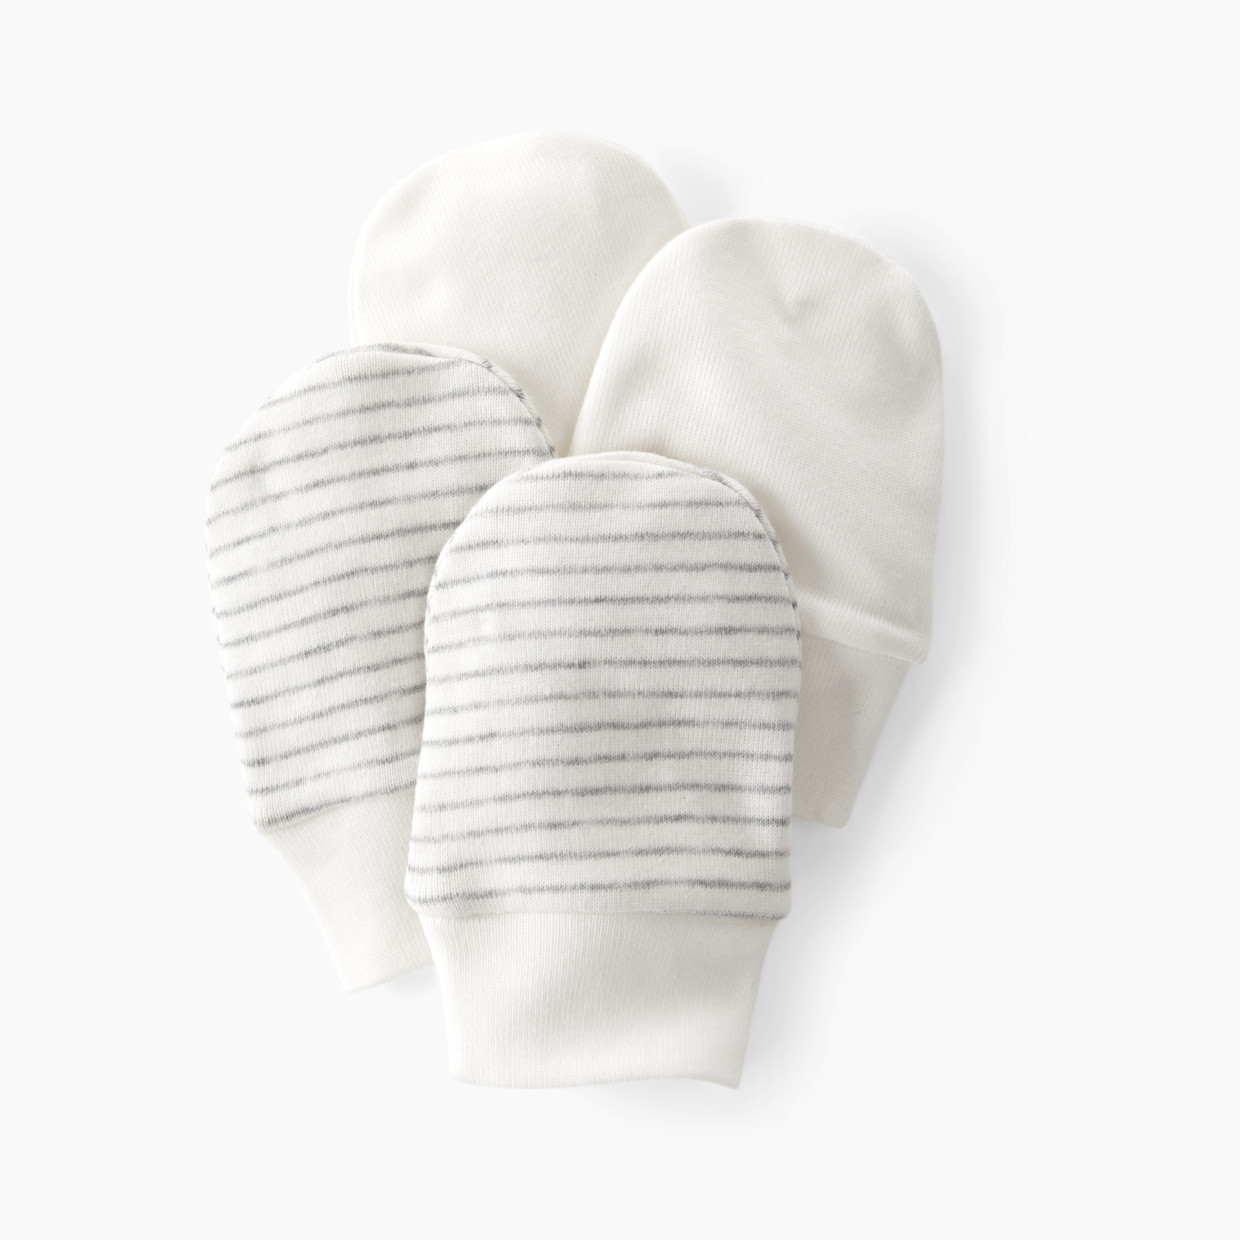 Carter's Little Planet 2-Pack Mitts - Cream, 0-3 M.